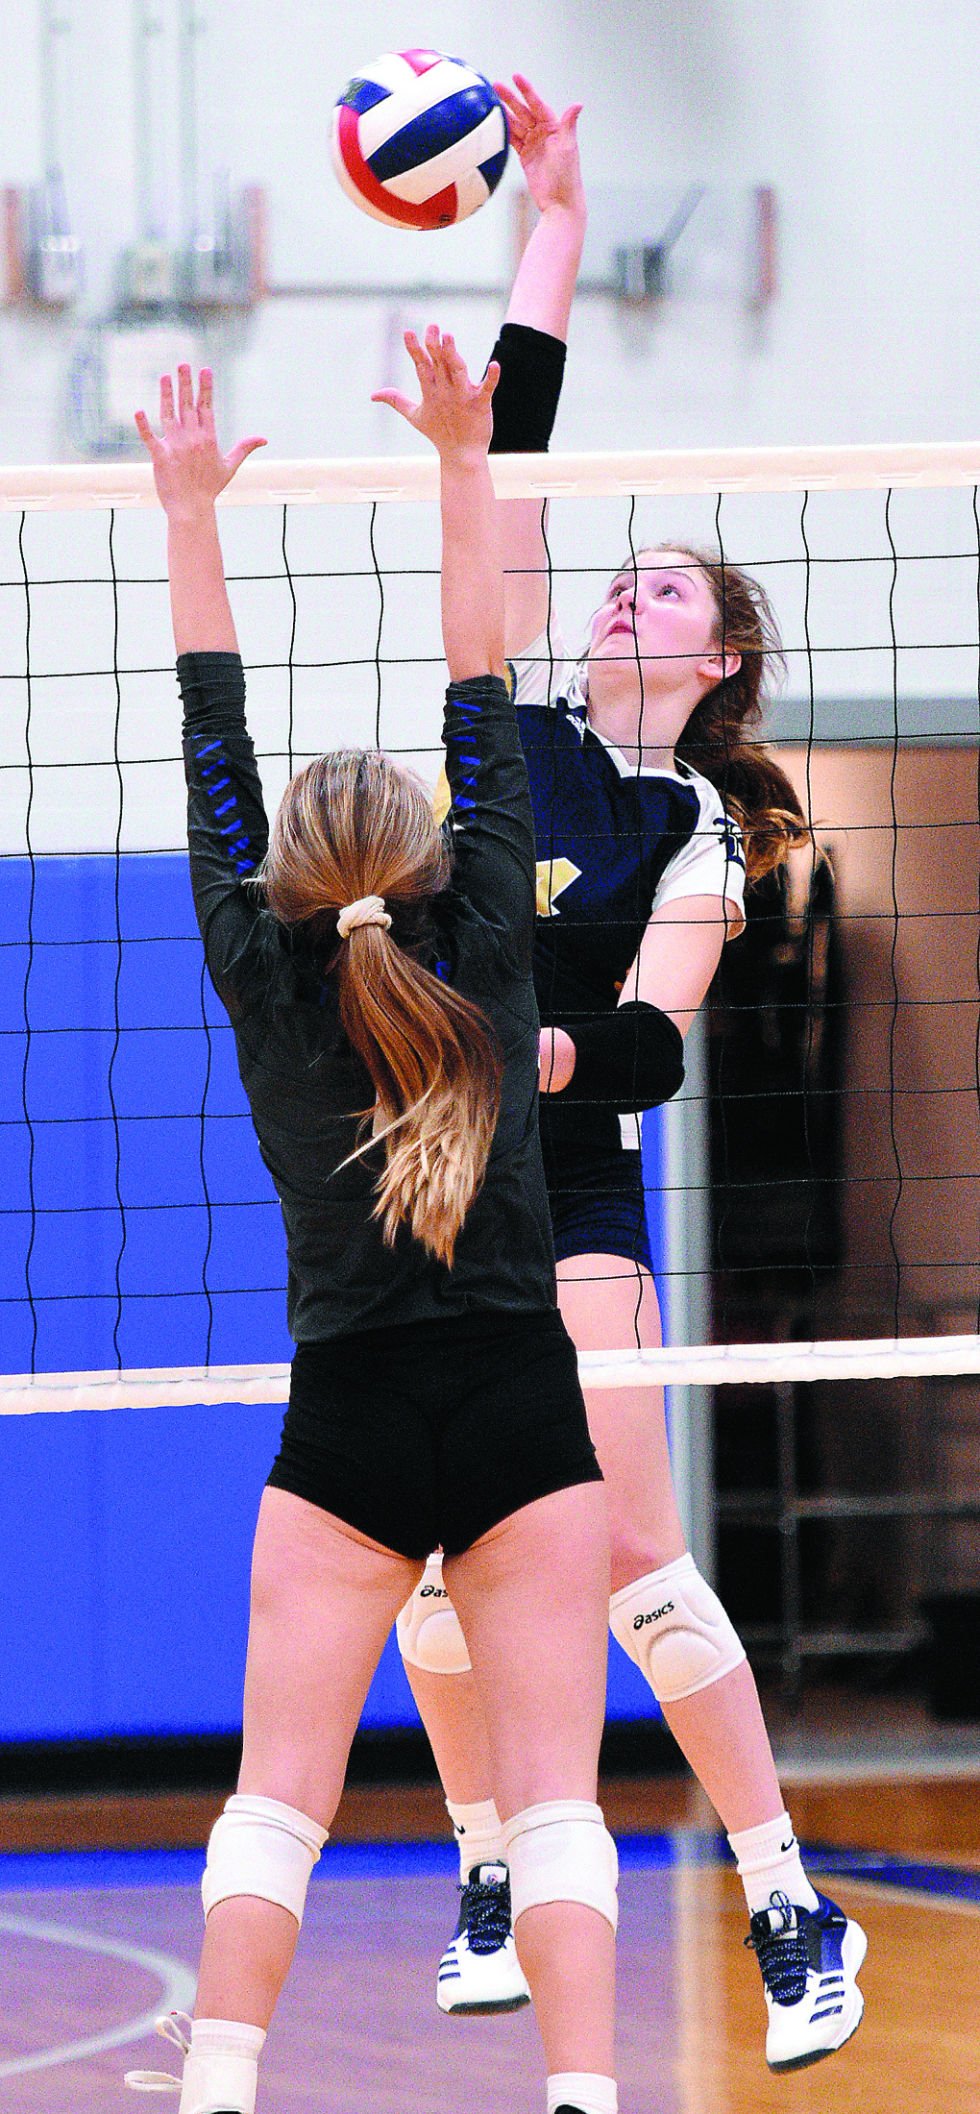 PREP ROUNDUP: E’town, Central pick up volleyball sweeps | Sports ...